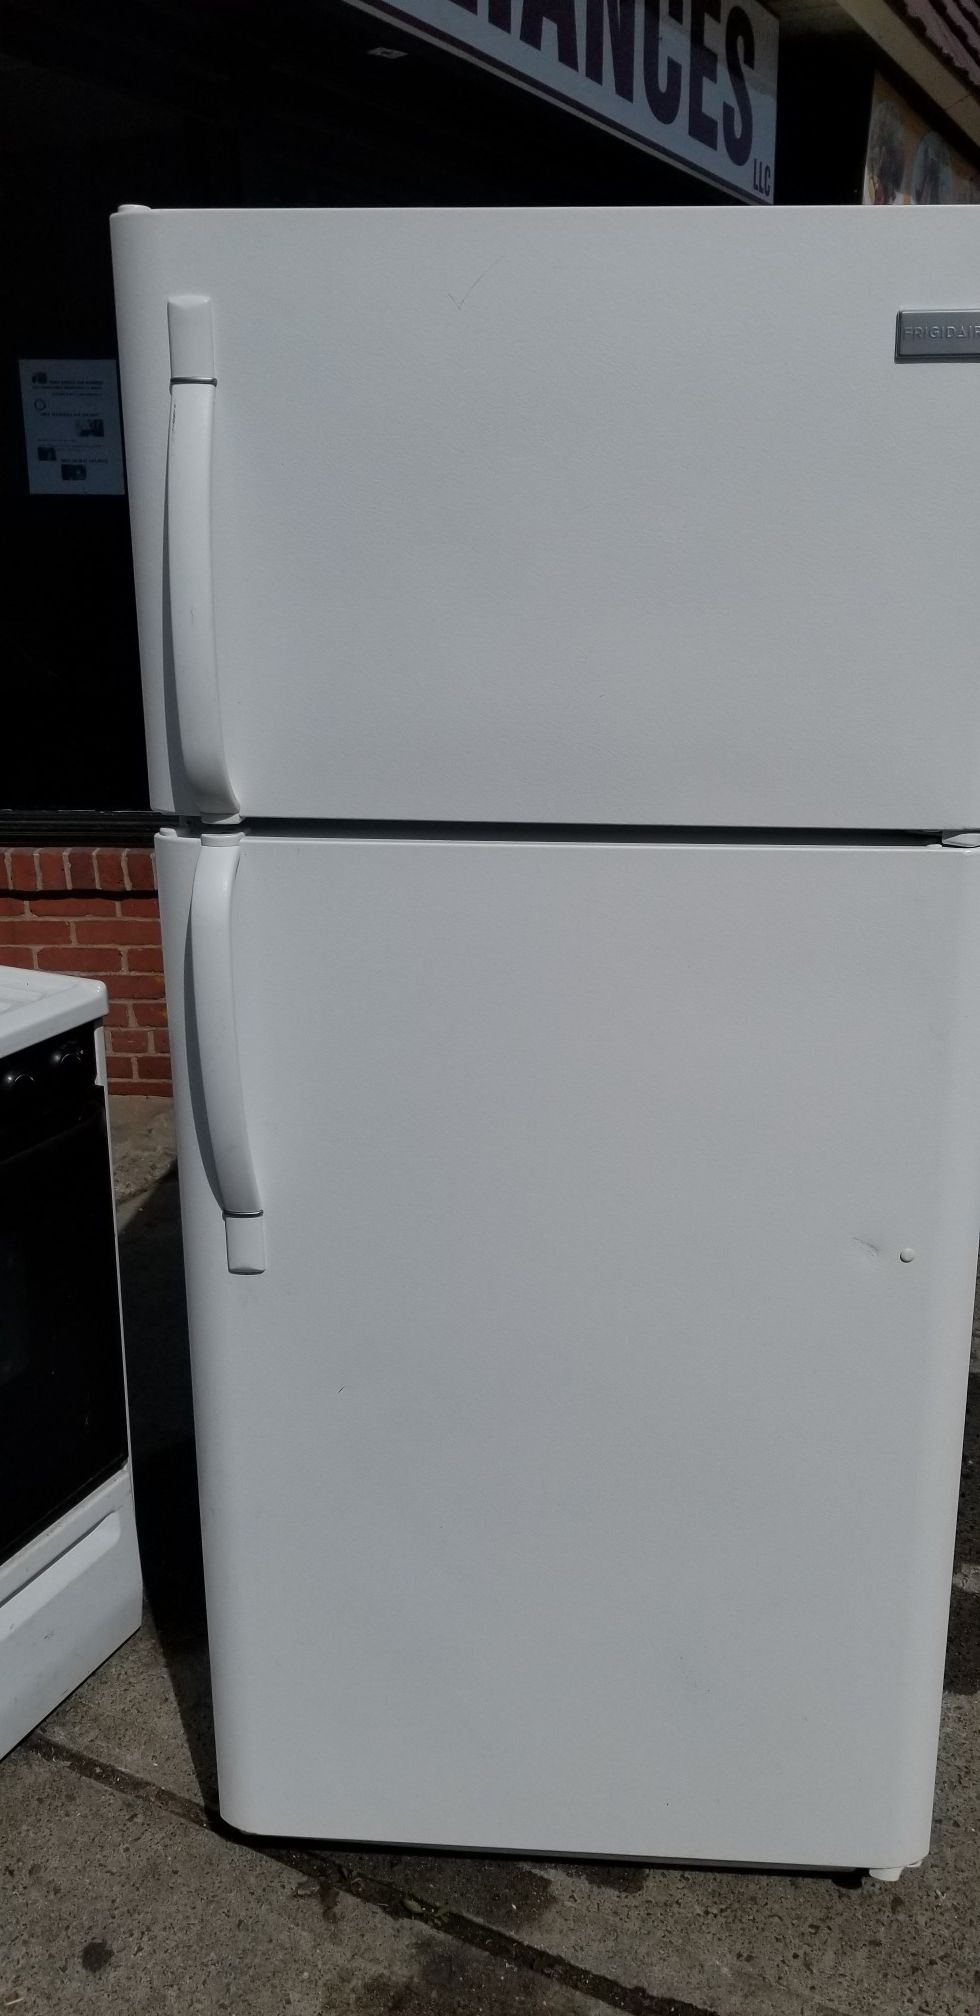 Usted refrigerator in very good condition.